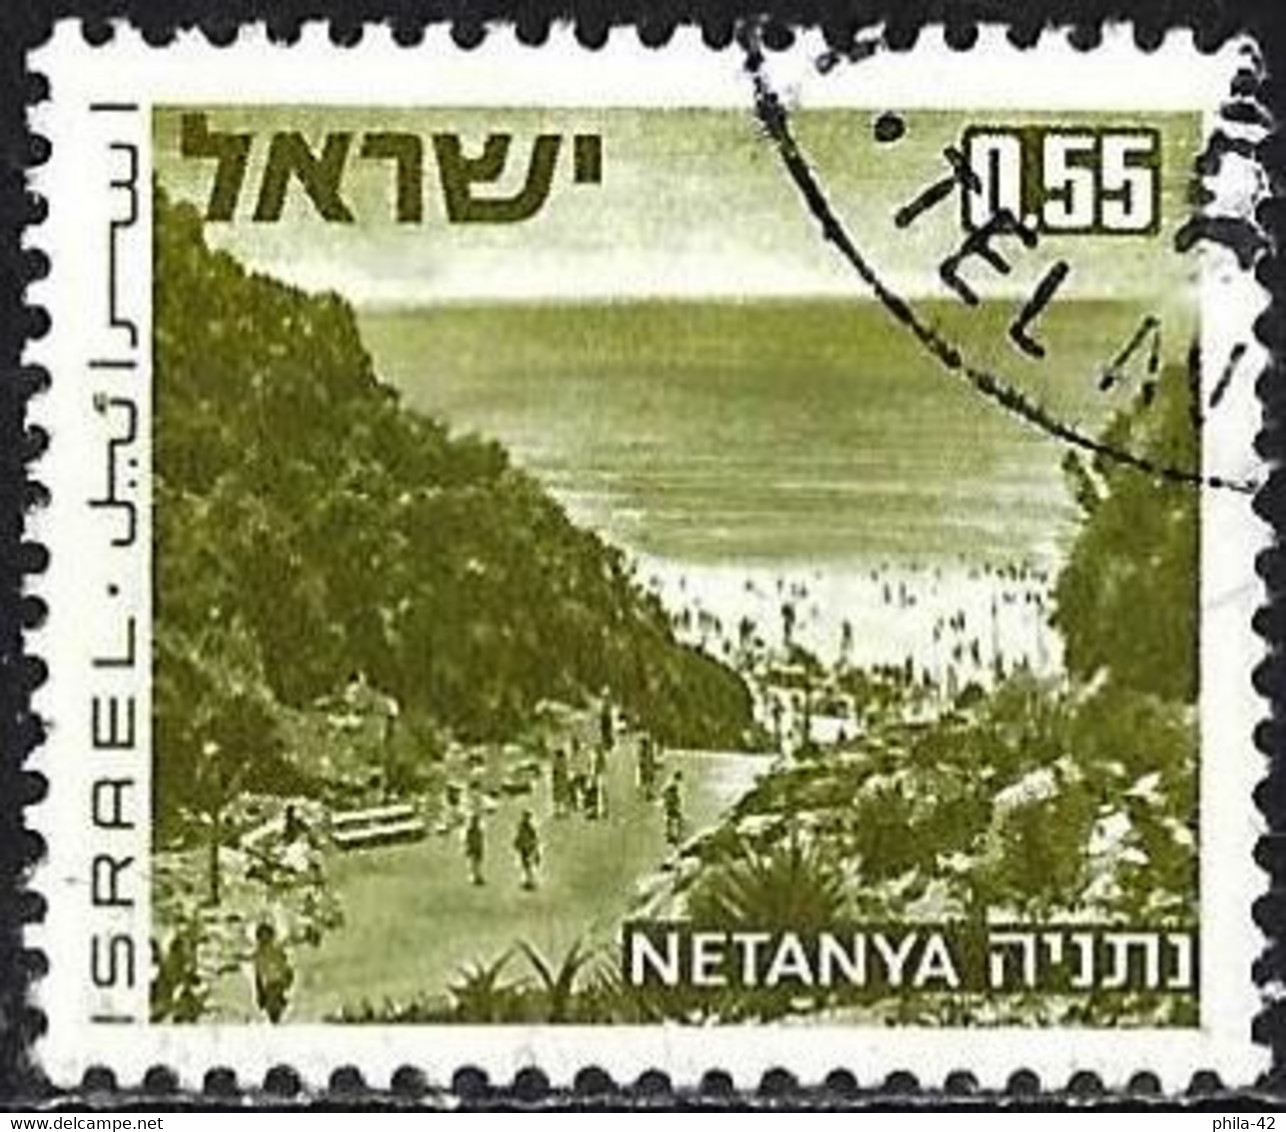 Israel 1972 - Mi 532x - YT 466 ( Landscape Of Israel : Netanya ) - Used Stamps (without Tabs)